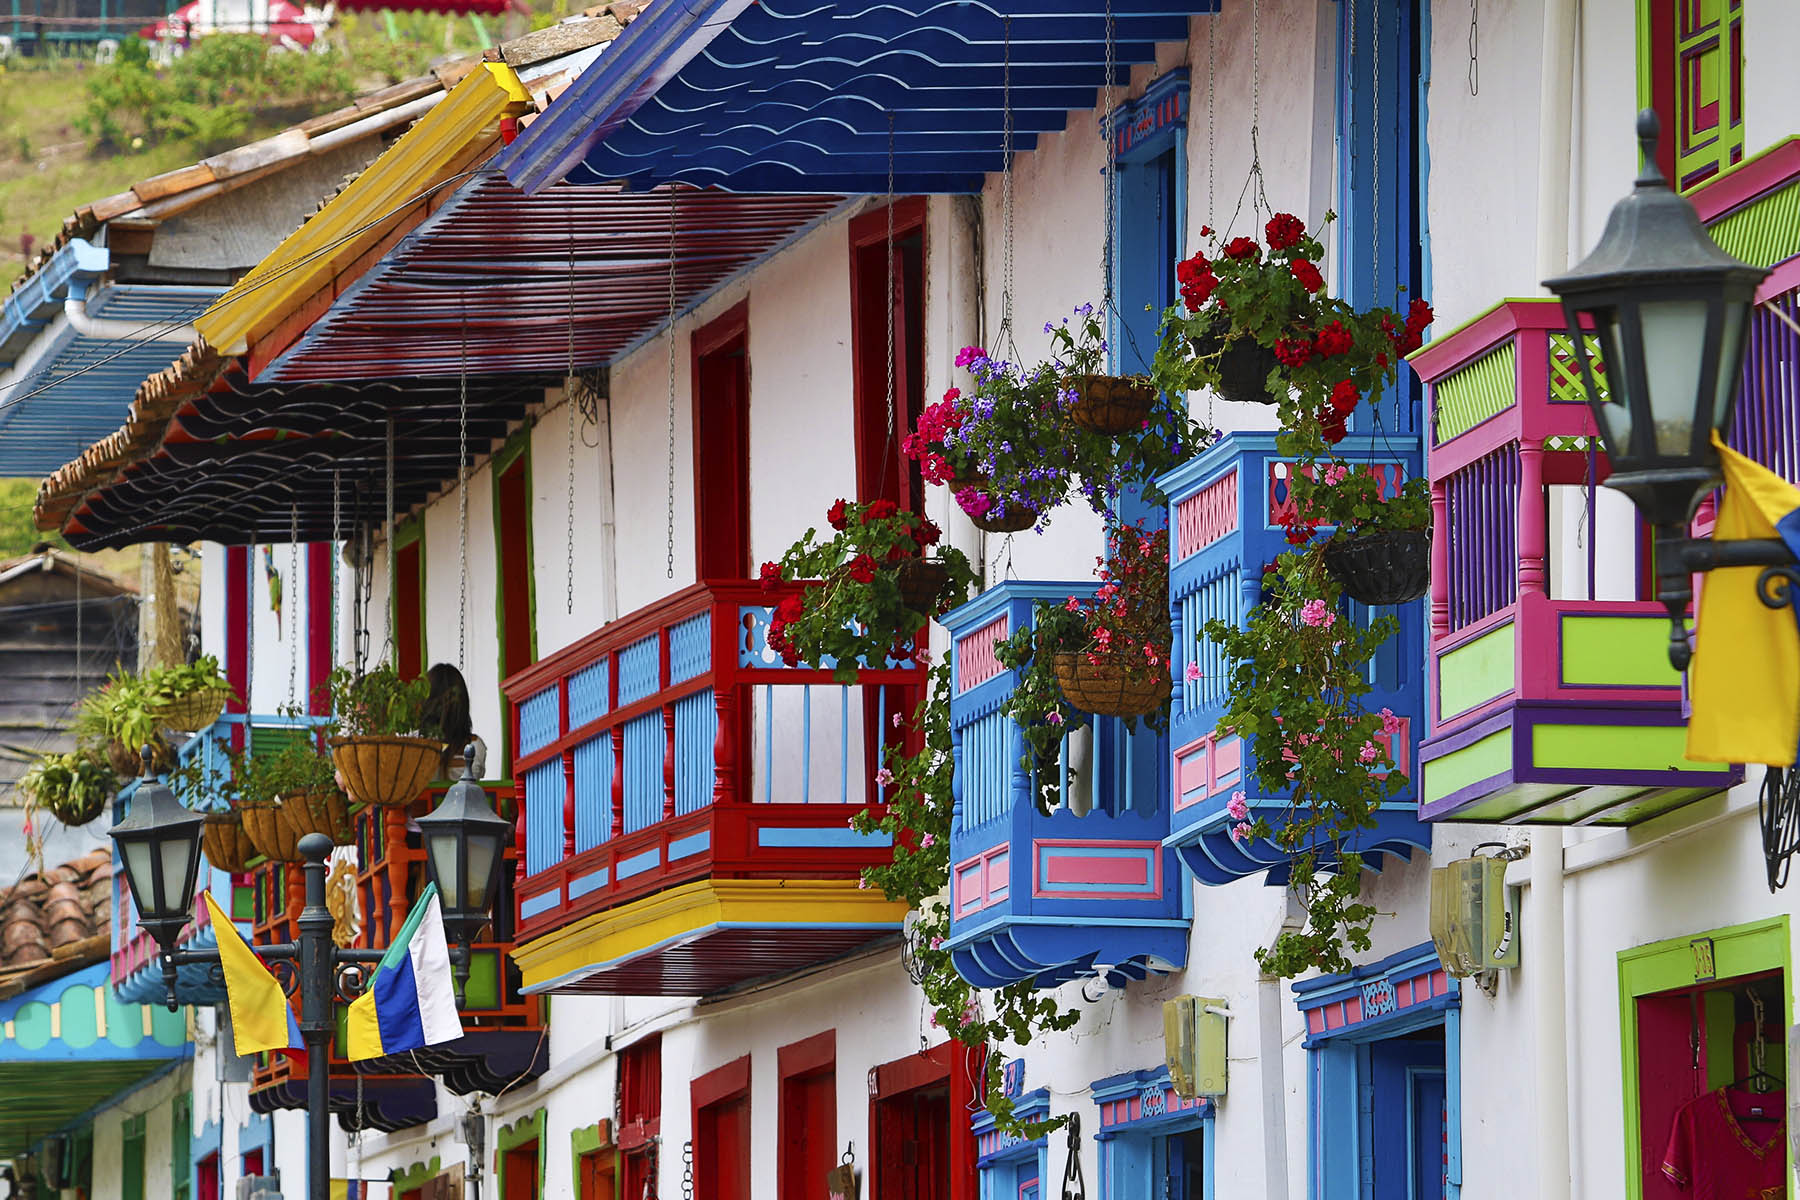 A photo of a row of homes in Colombia, with flowers on the colourful balconies.